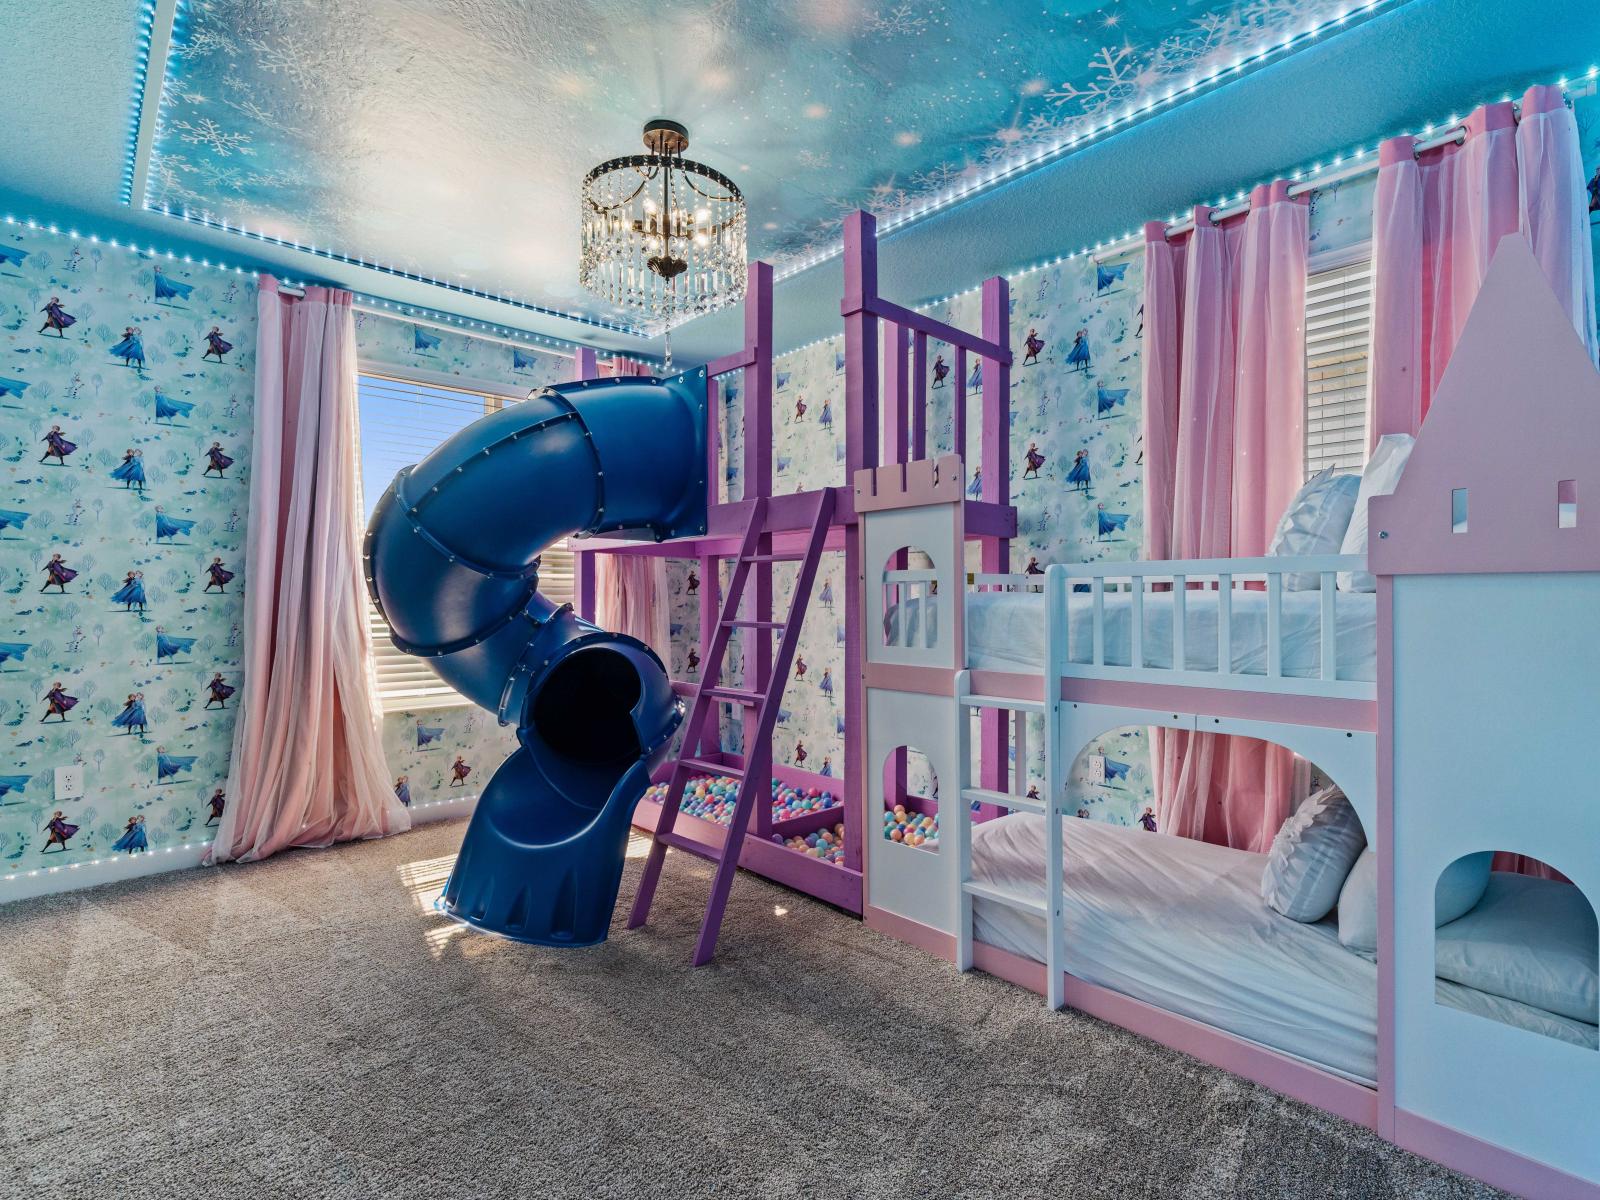 Amazing Bedroom of the Home in Davenport Florida - Frozen Themed Bedroom - Slide and Play Area - Smart TV and Netflix